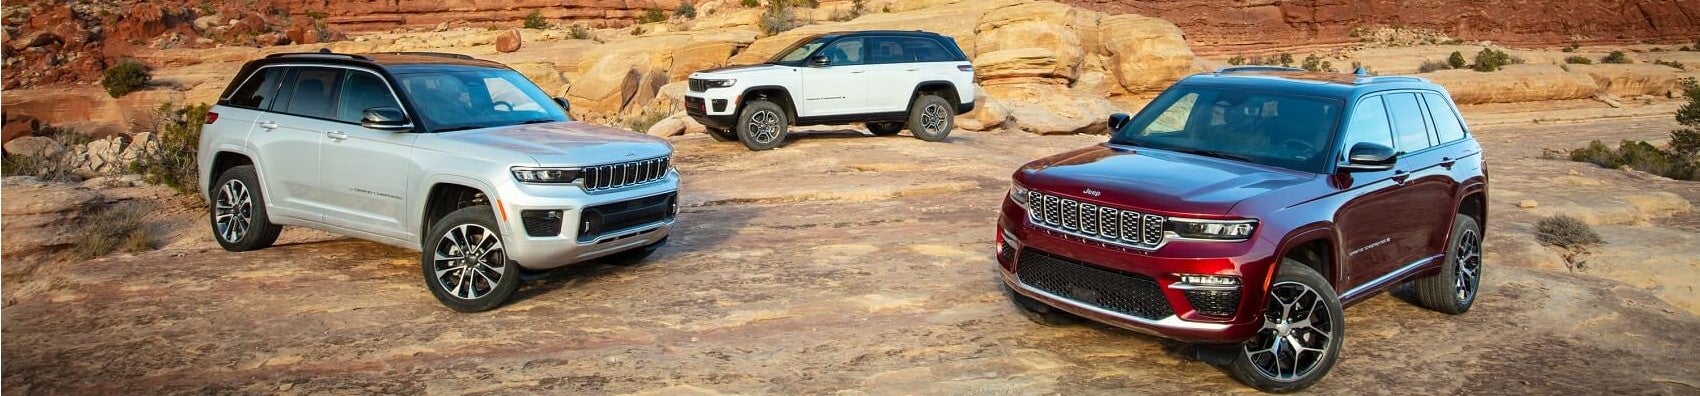 Jeep Cherokee Trio Snippet